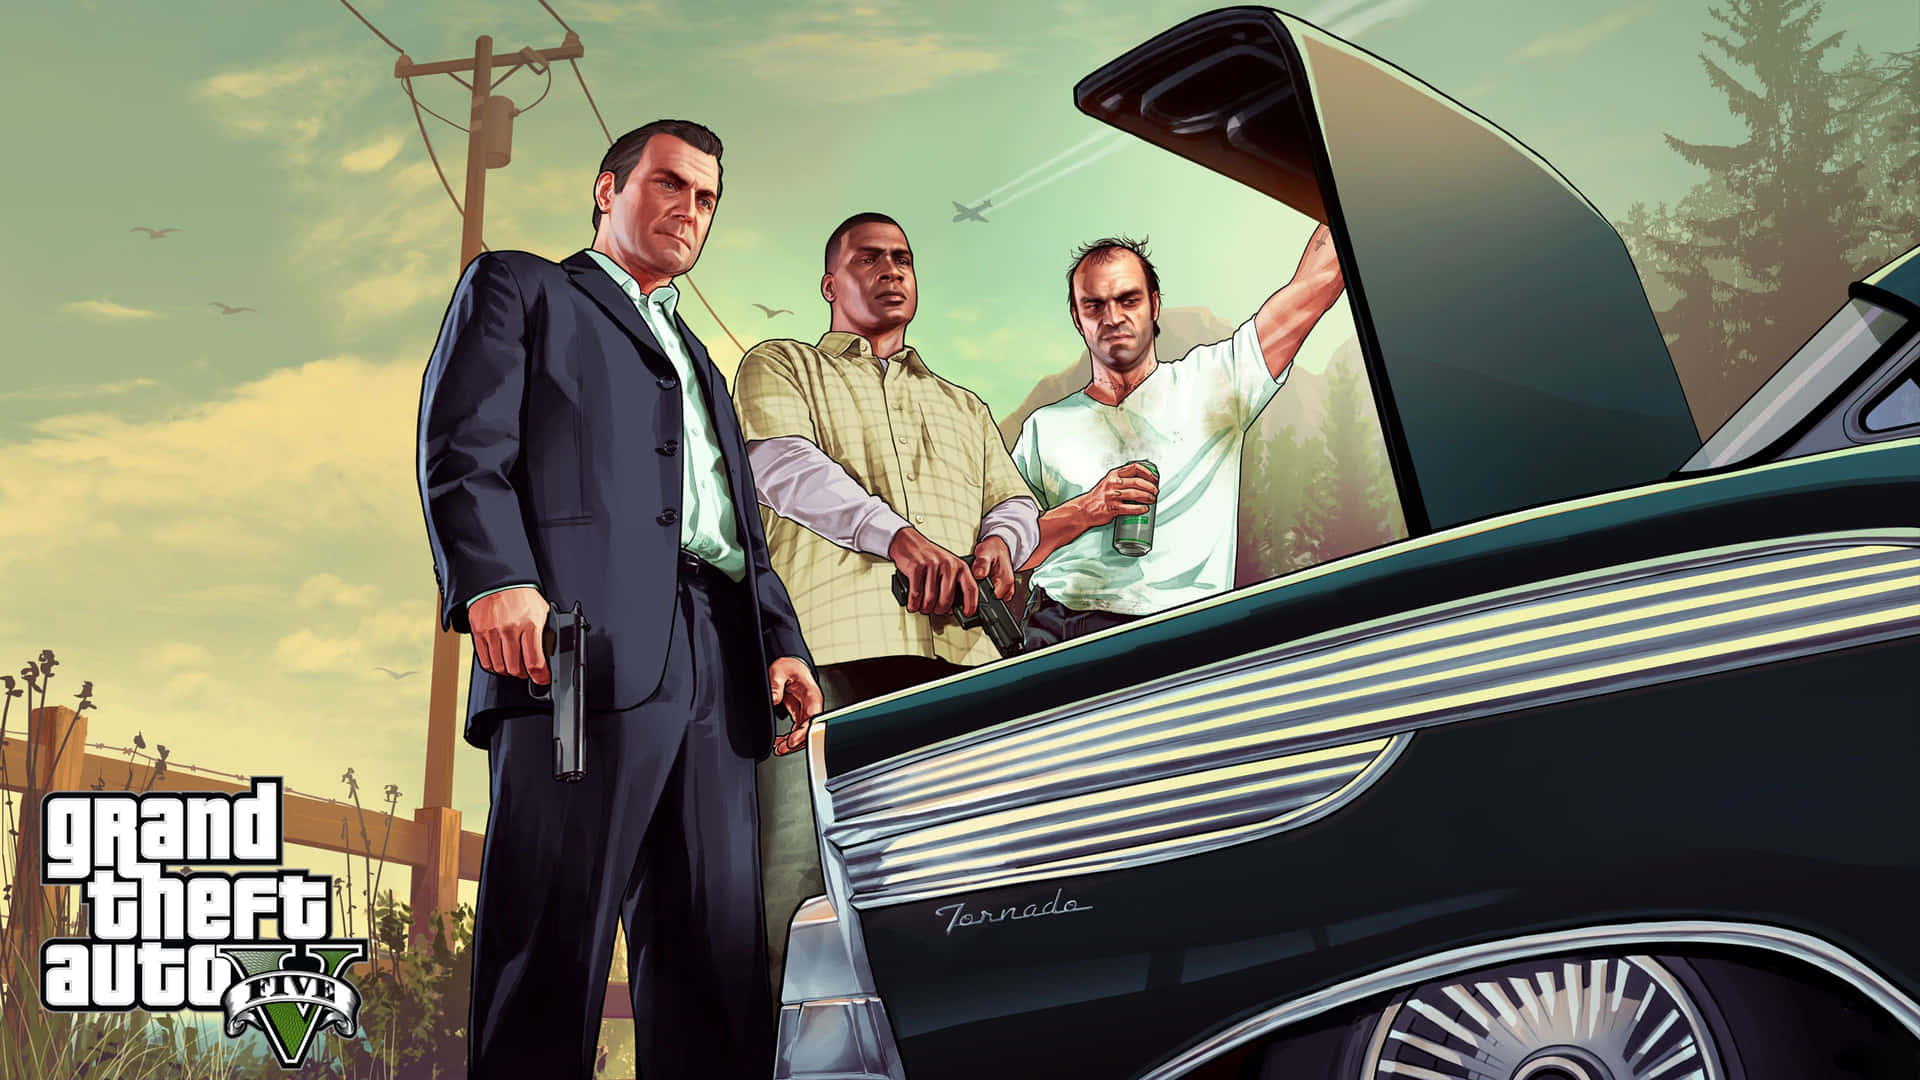 Grand Theft Auto V in Ultra High Definition 4K. Wallpaper